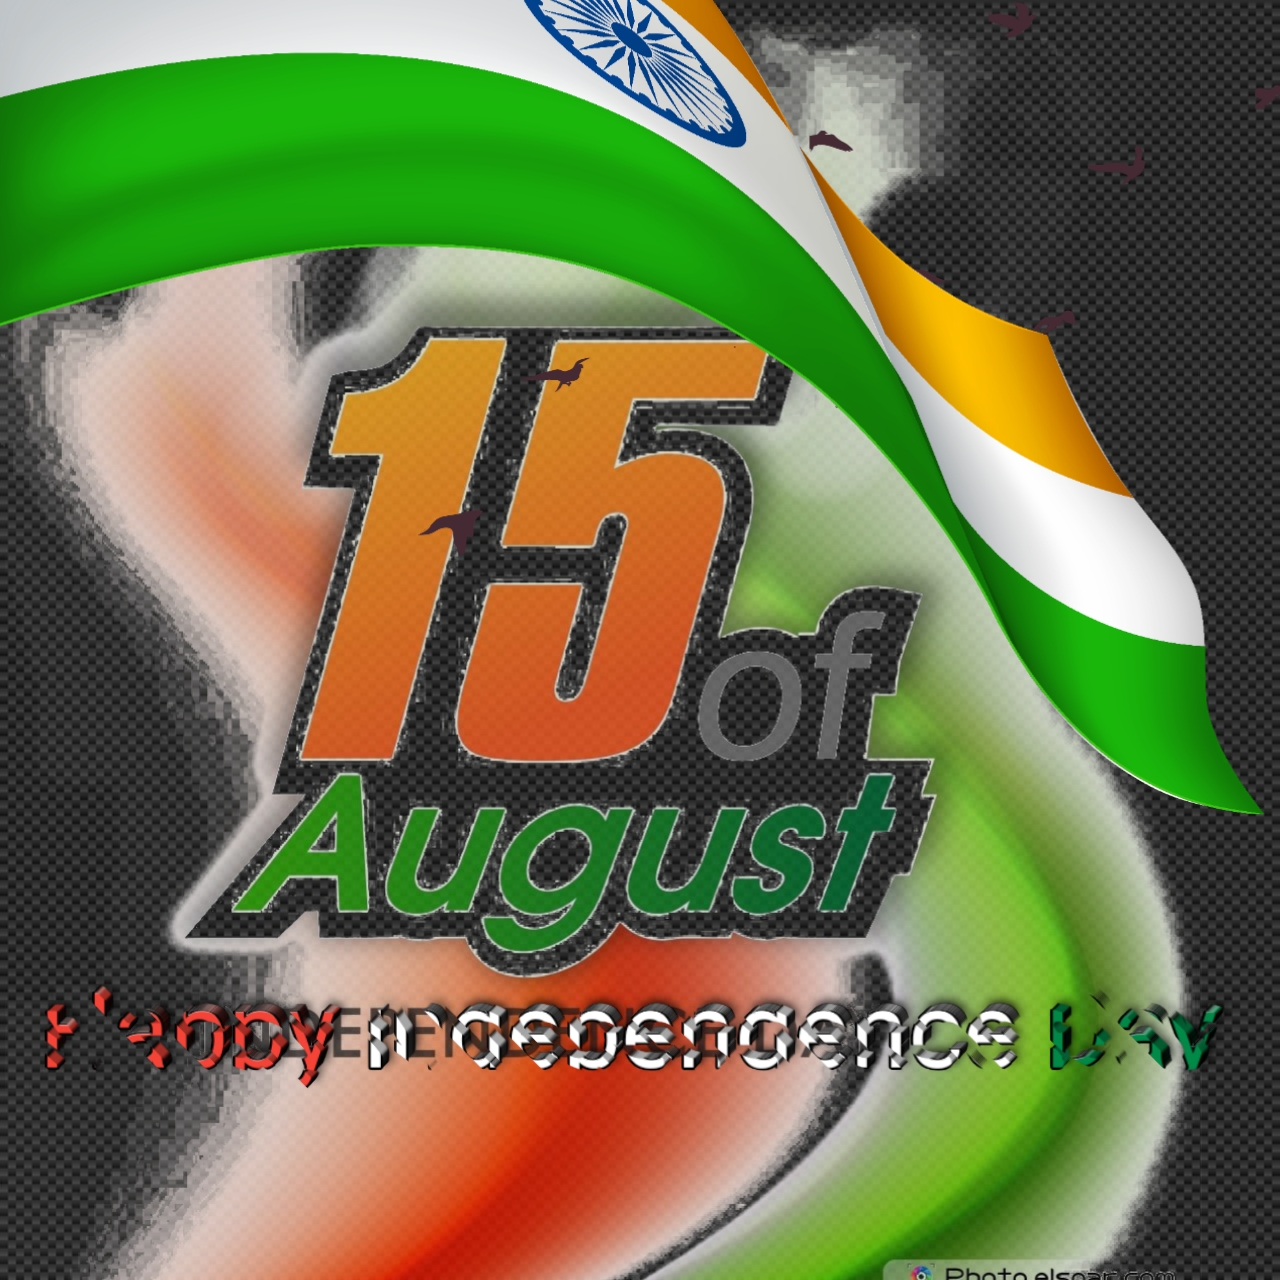 15th August Independence Day 4K Wishes Image & Download